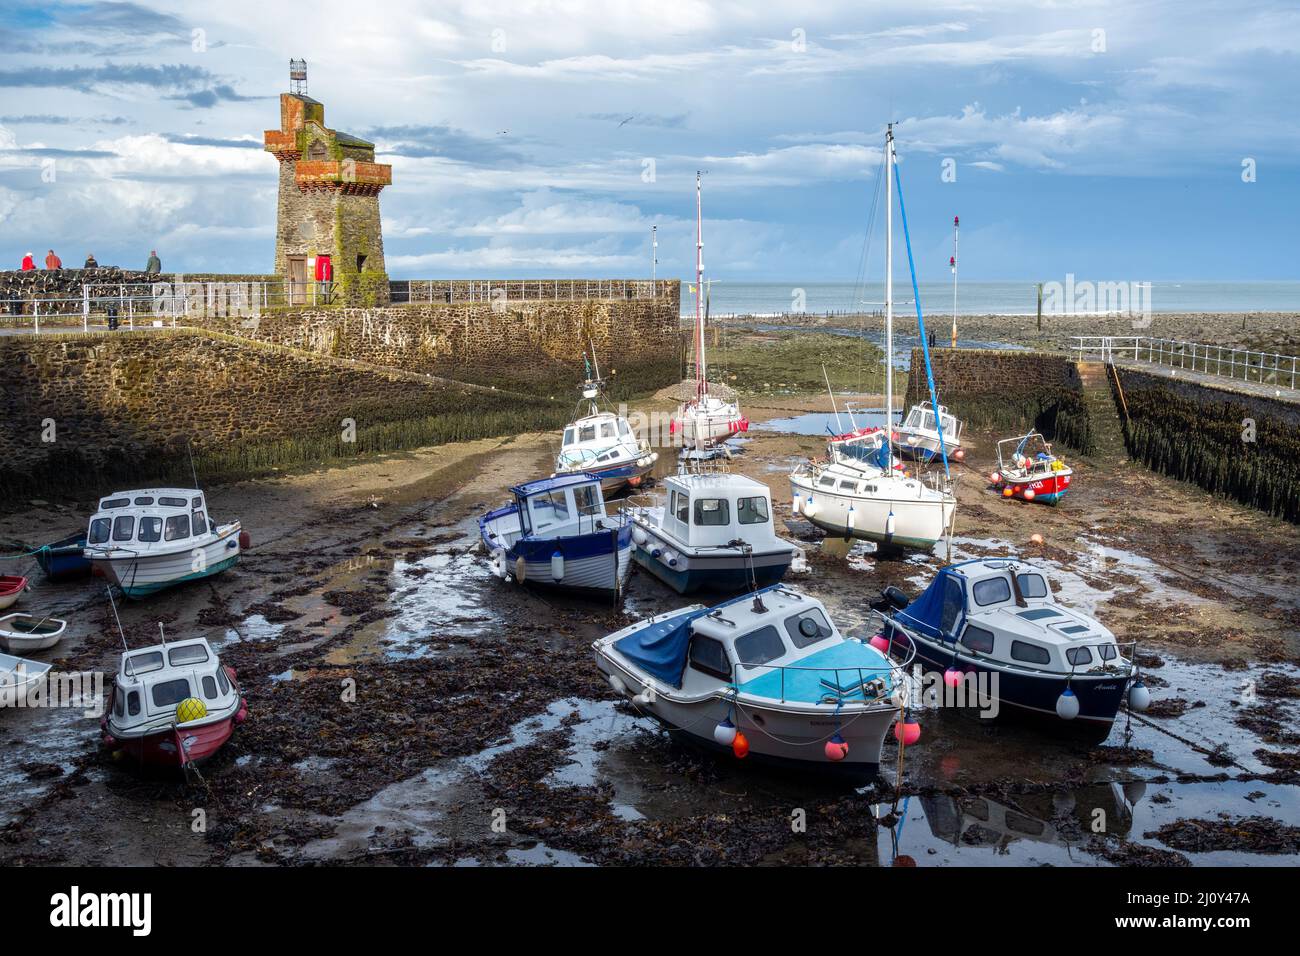 LYNMOUTH, DEVON, UK - OCTOBER 19 : View of the harbour at low tide in Lynmouth, Devon on October 19, 2013. Unidentified people Stock Photo